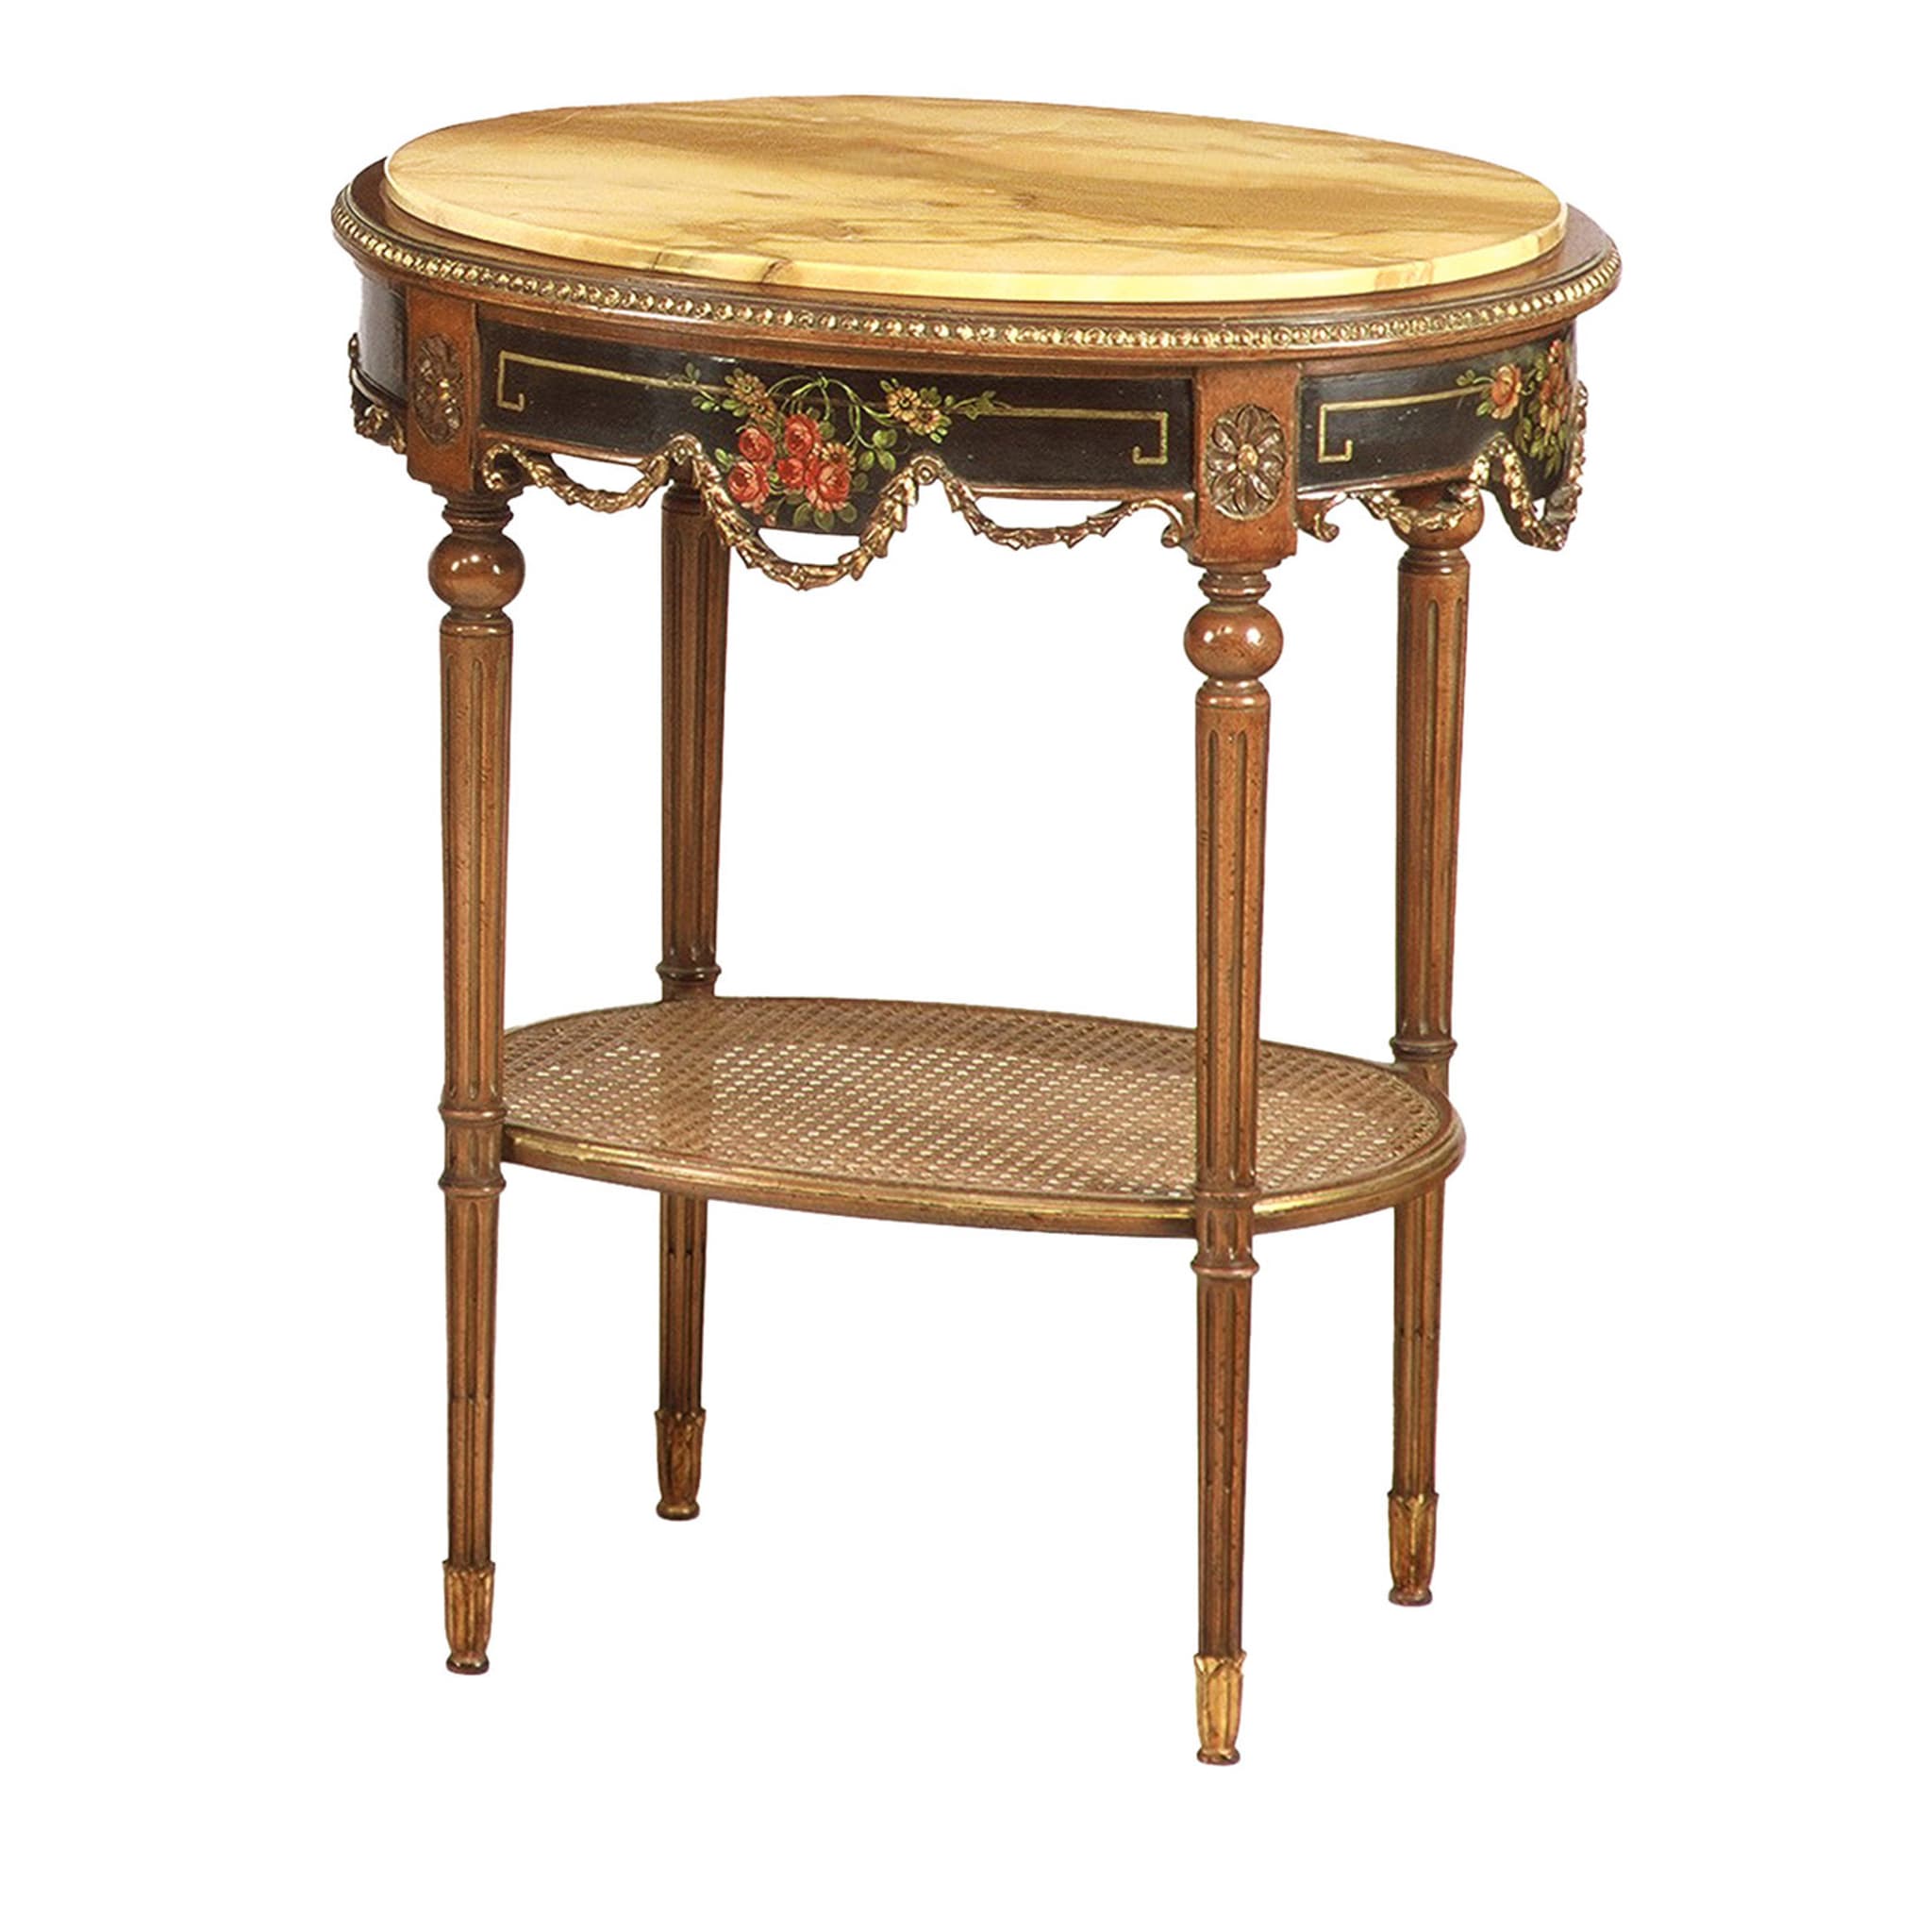 French Noclassic-Style Oval Side Table #1 - Main view